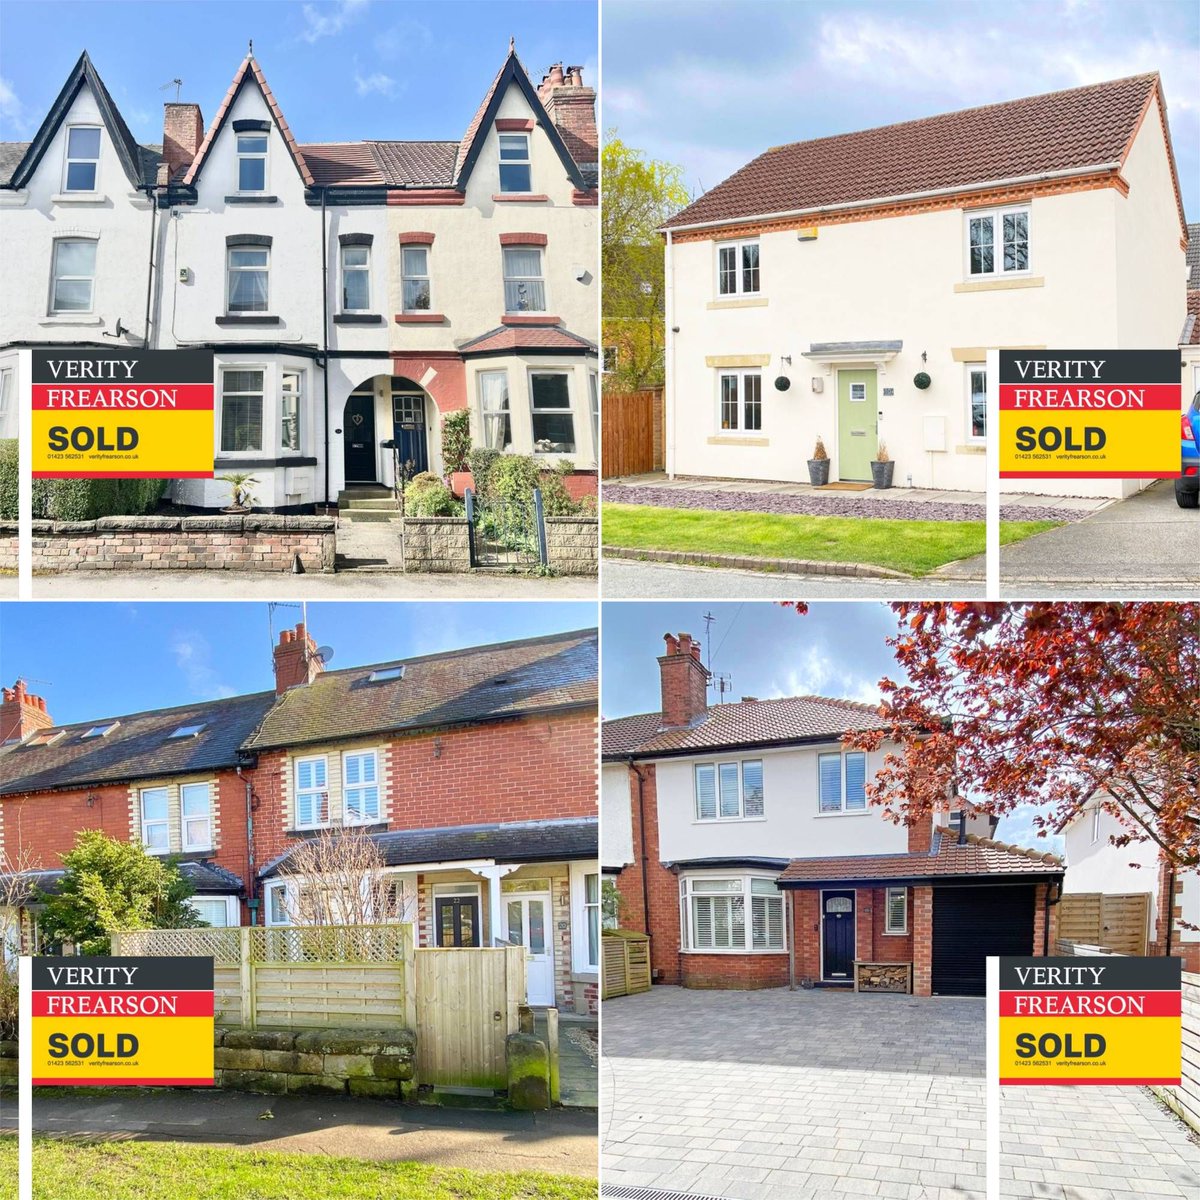 🏡 Four more super family homes SOLD!🏡 

☎️ To discuss selling your home, call our super friendly sales team on 01423 562531.
-
-
#harrogate #knaresborough #forsale #property #sstc #theharrogateagent #sellyourhome #estateagent